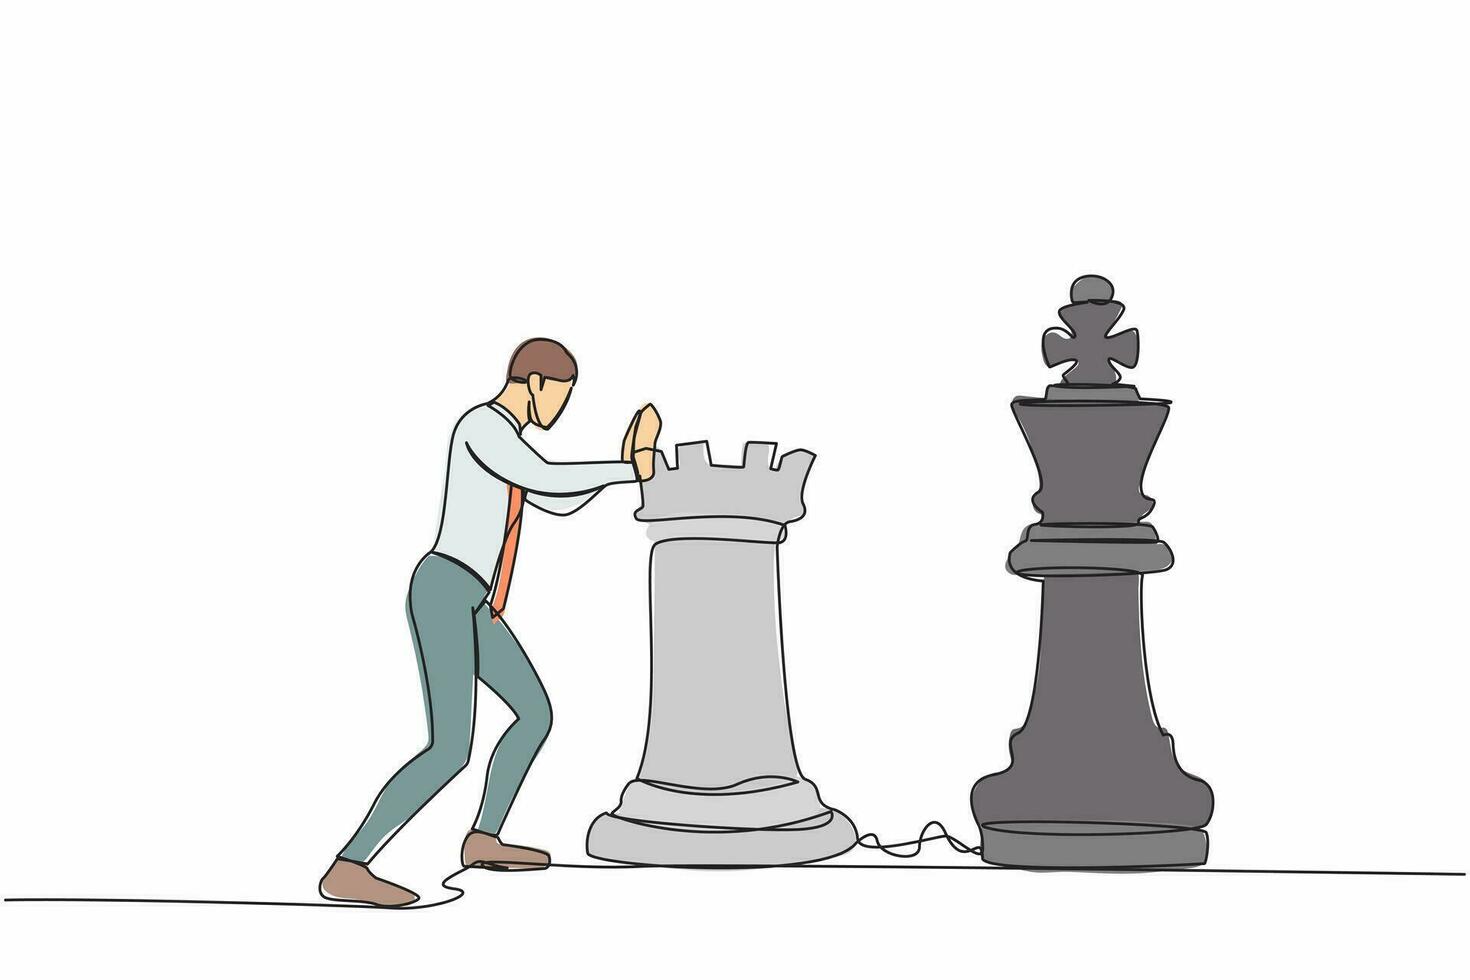 Single one line drawing competitive businessman push huge rook chess piece to beat king. Business strategy and marketing plan. Strategic move. Continuous line draw design graphic vector illustration